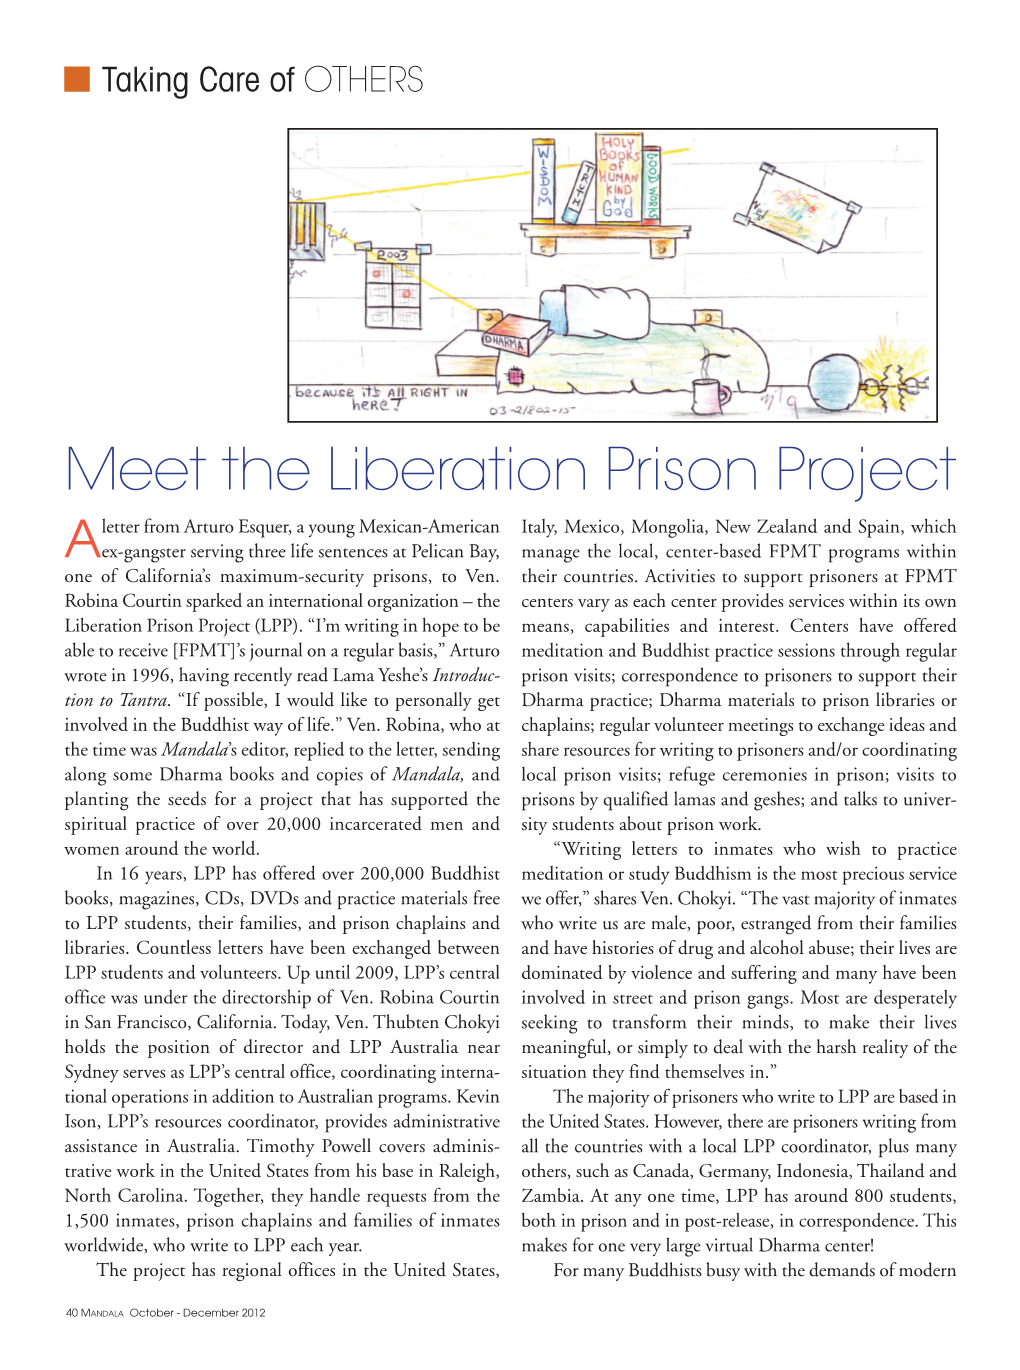 Meet the Liberation Prison Project